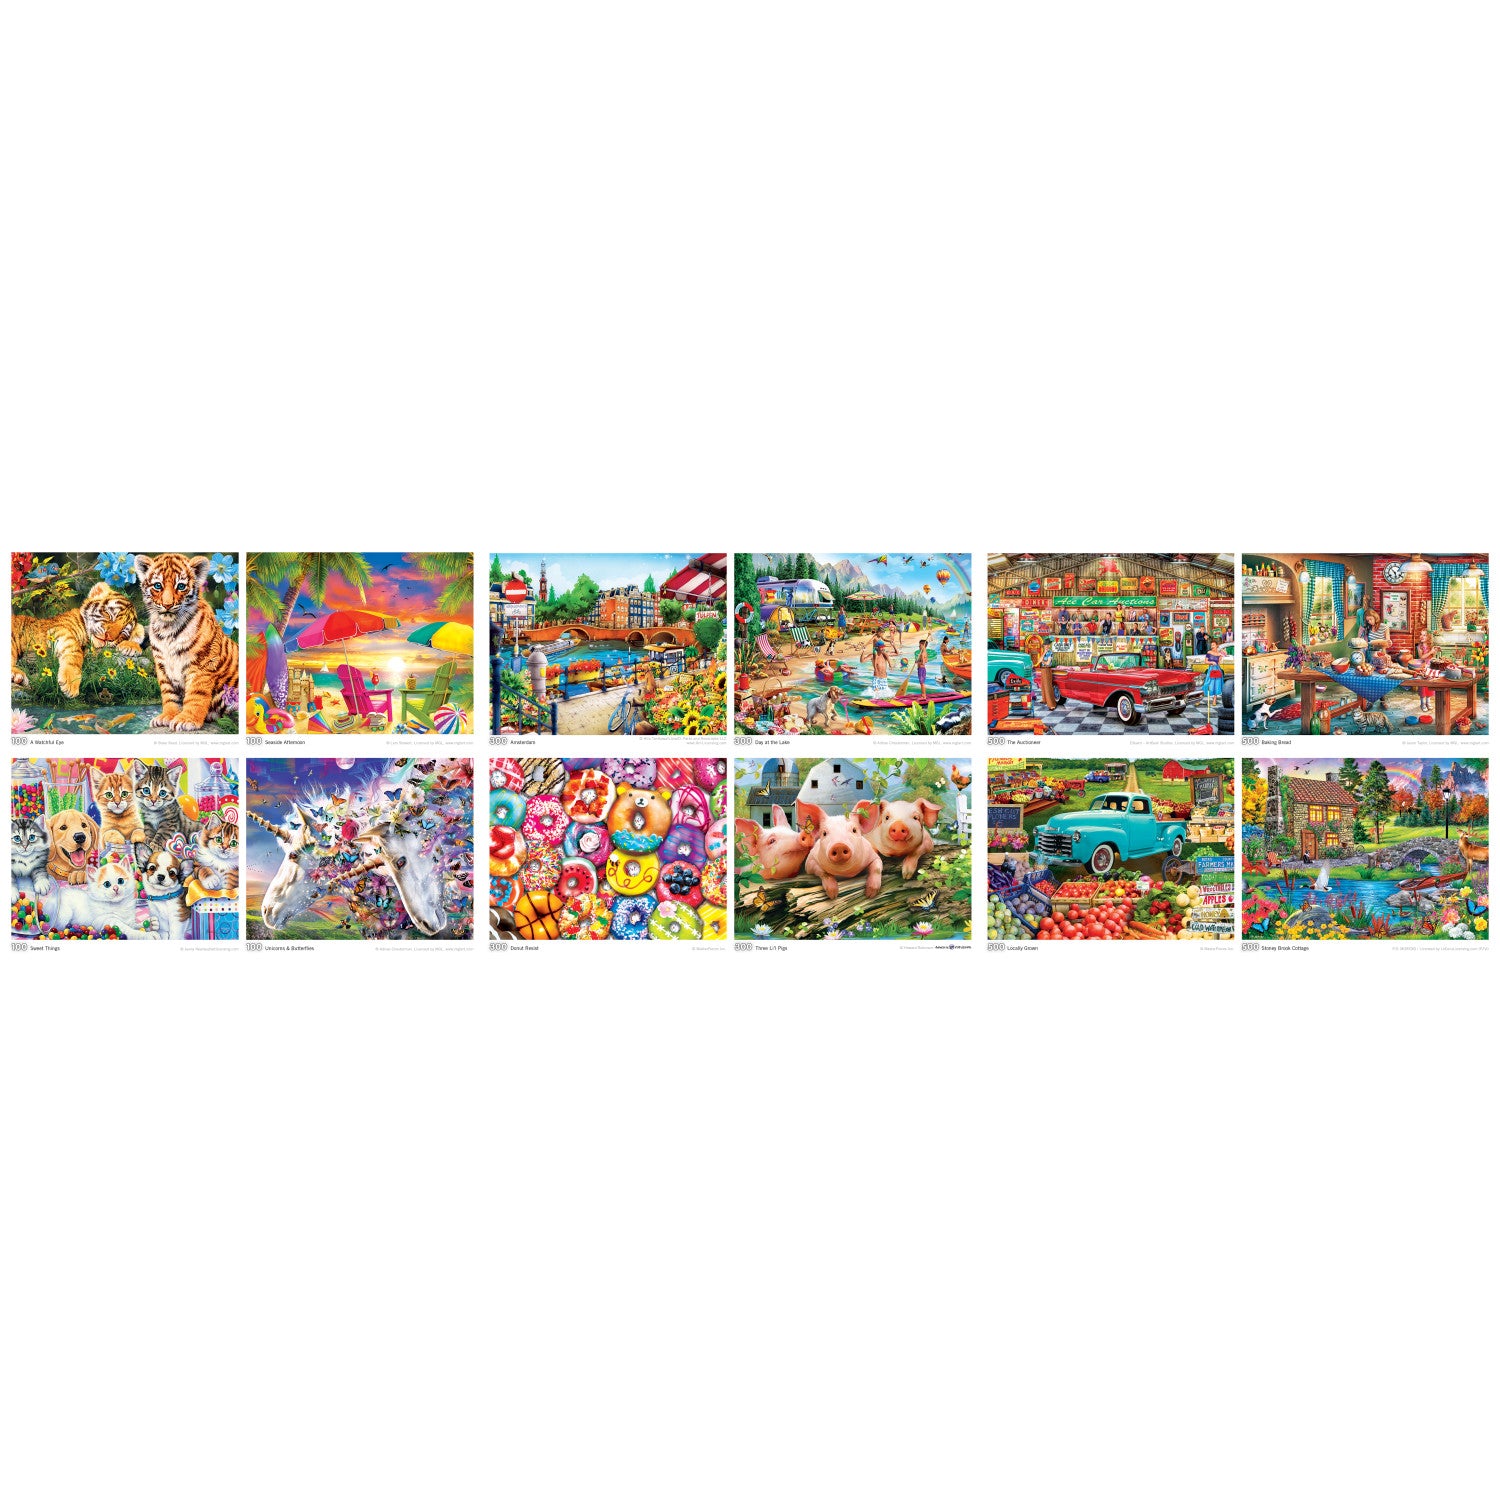 Artist Gallery V2 12-Pack Puzzle Assortment